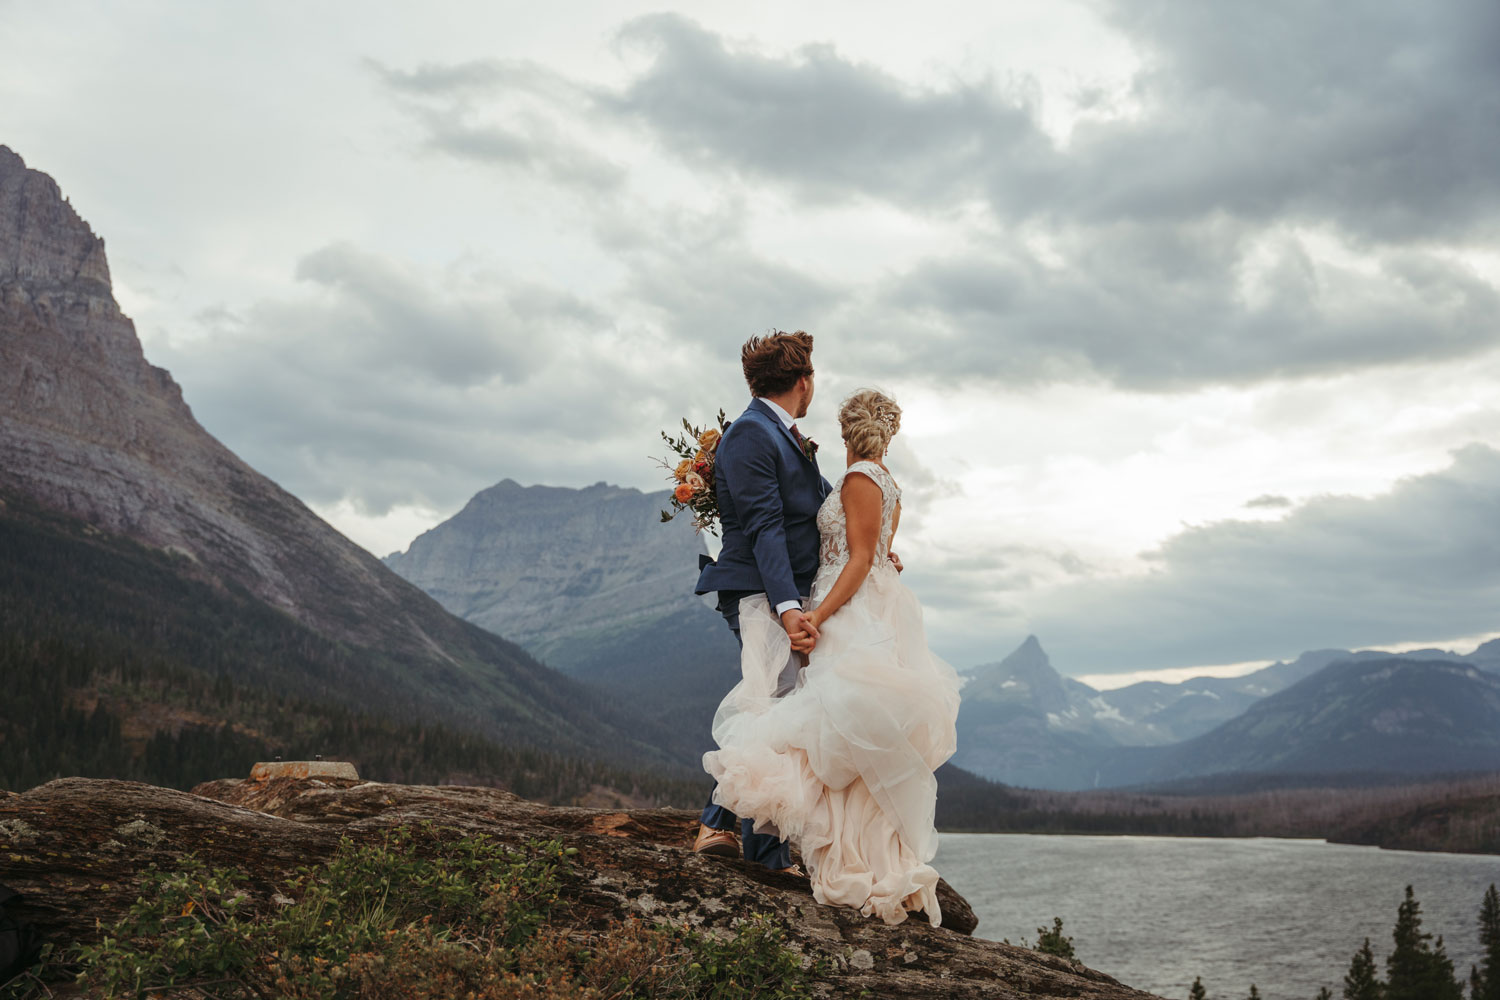 Abby and Beau on day one of their multi-day Glacier wedding adventure at Sun Point overlooking Saint Mary Lake.